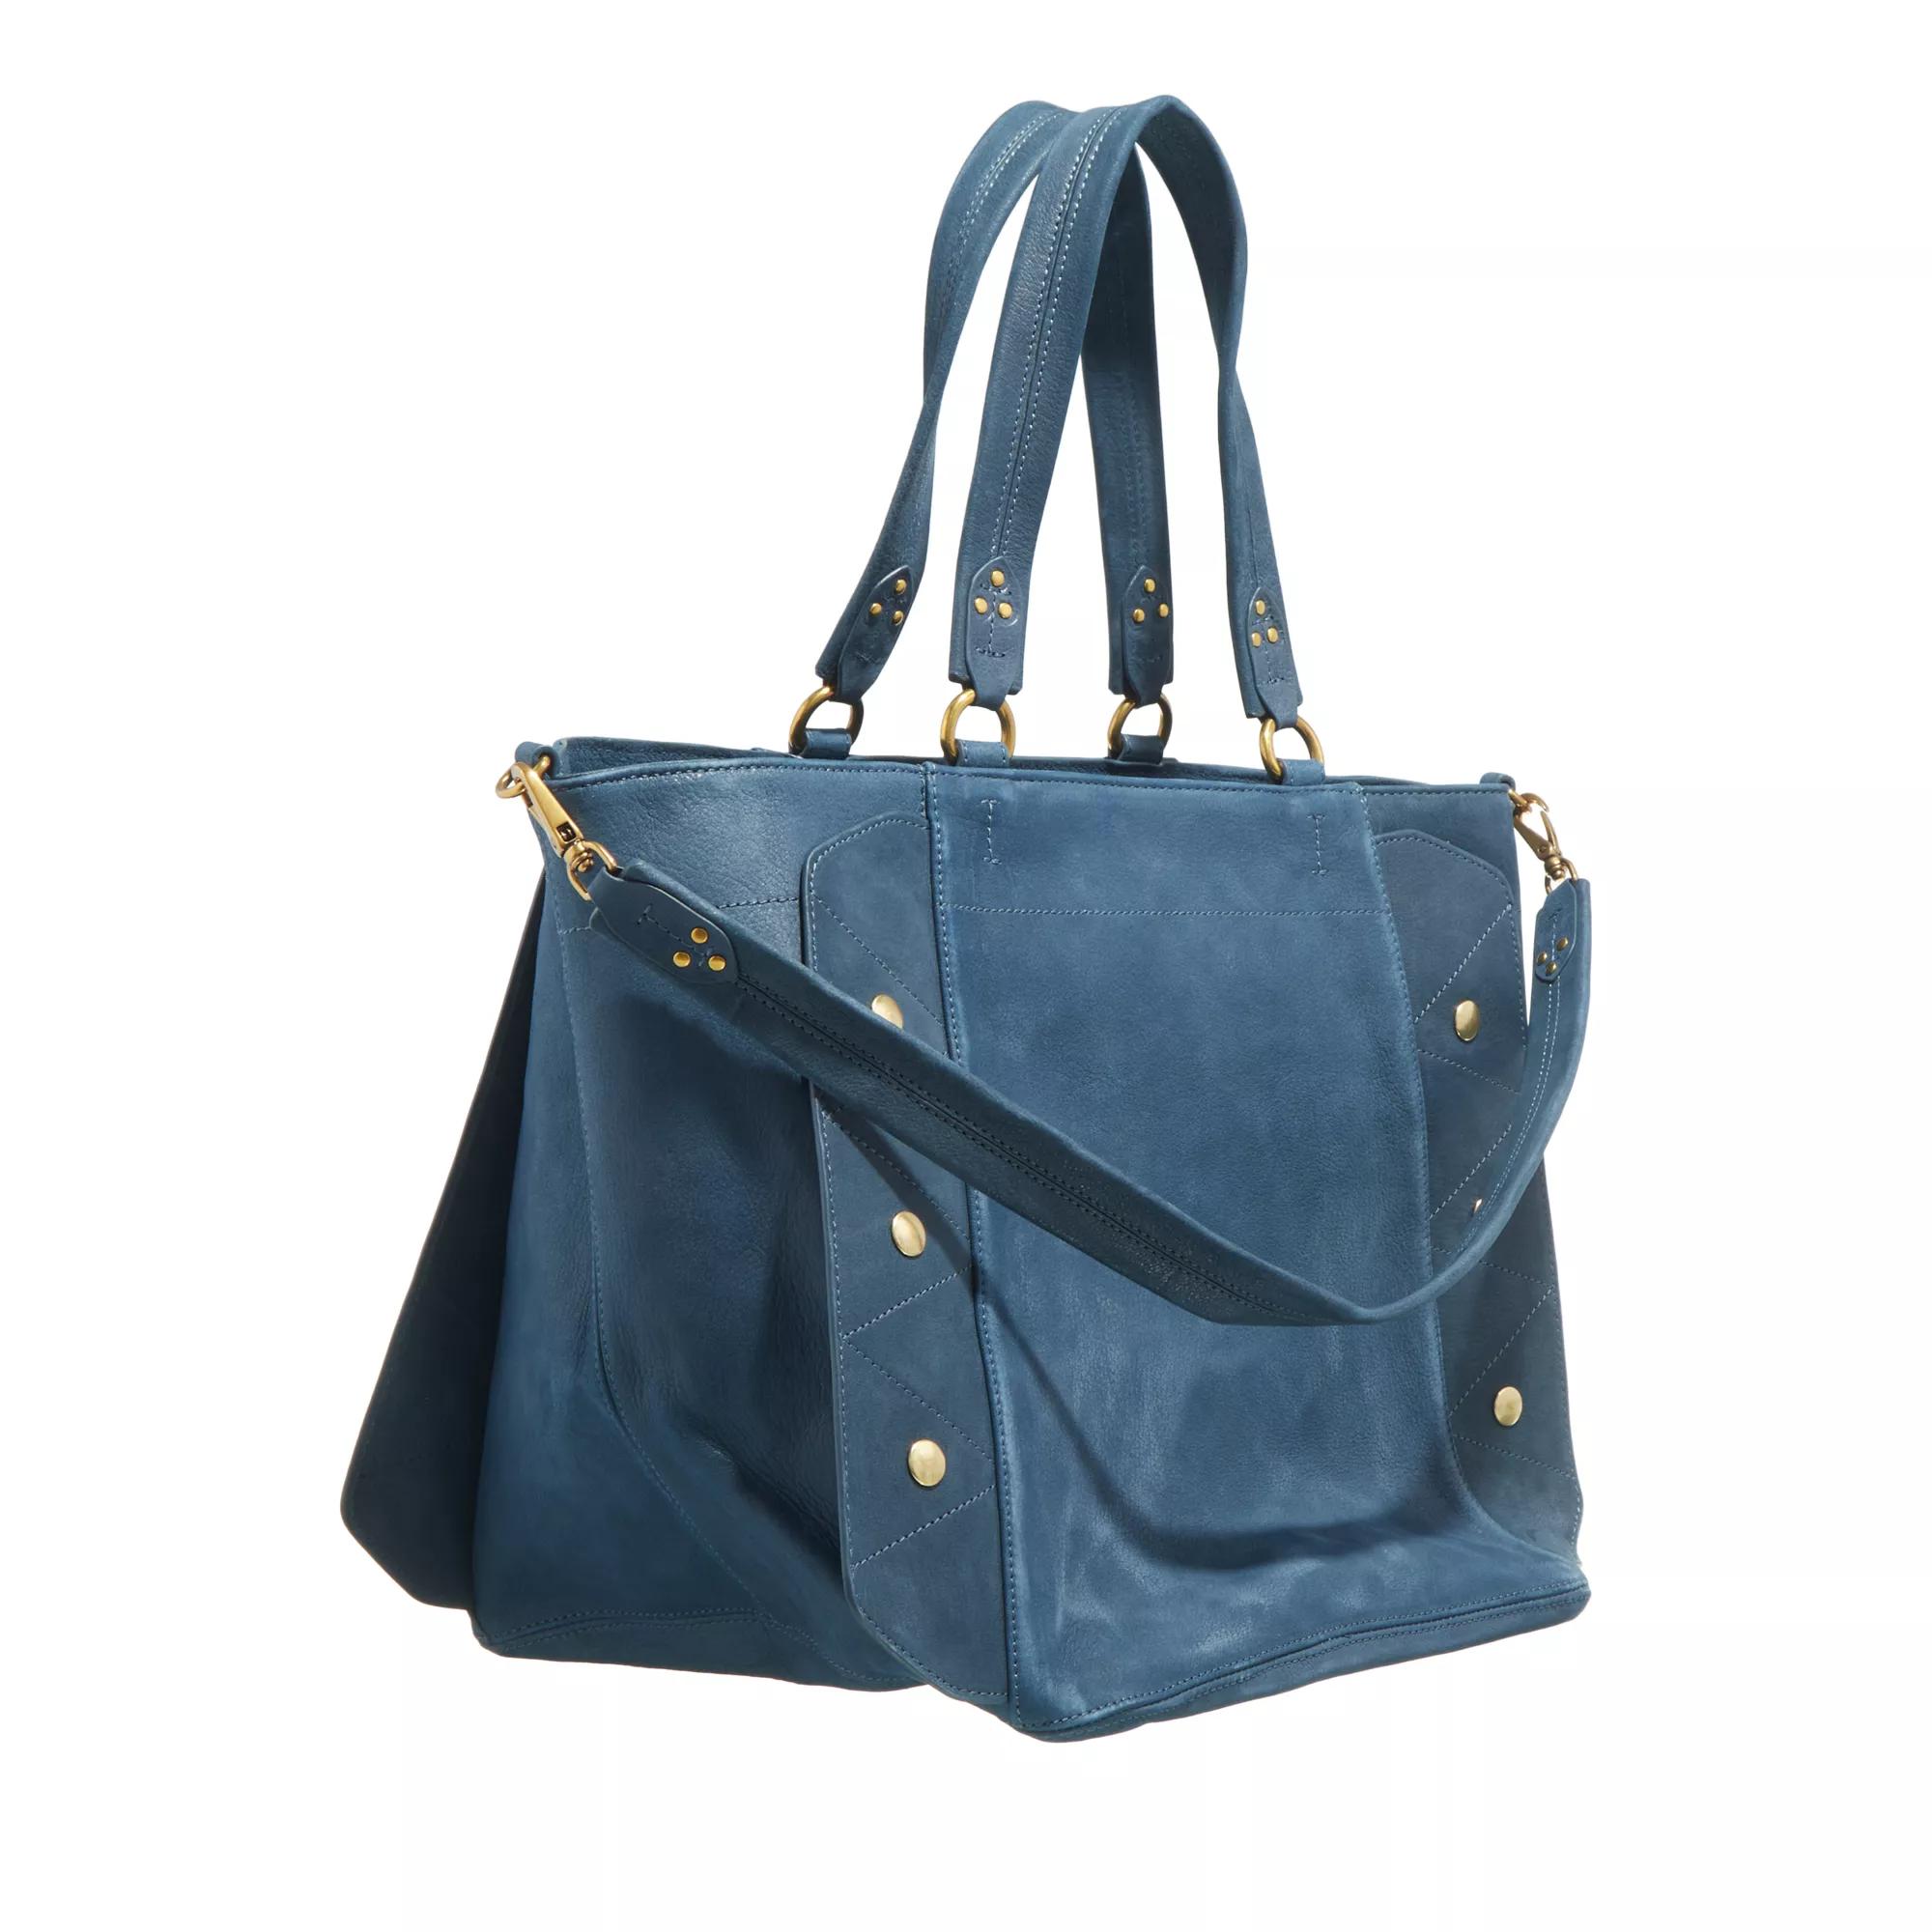 Jerome Dreyfuss Totes Roger in blauw